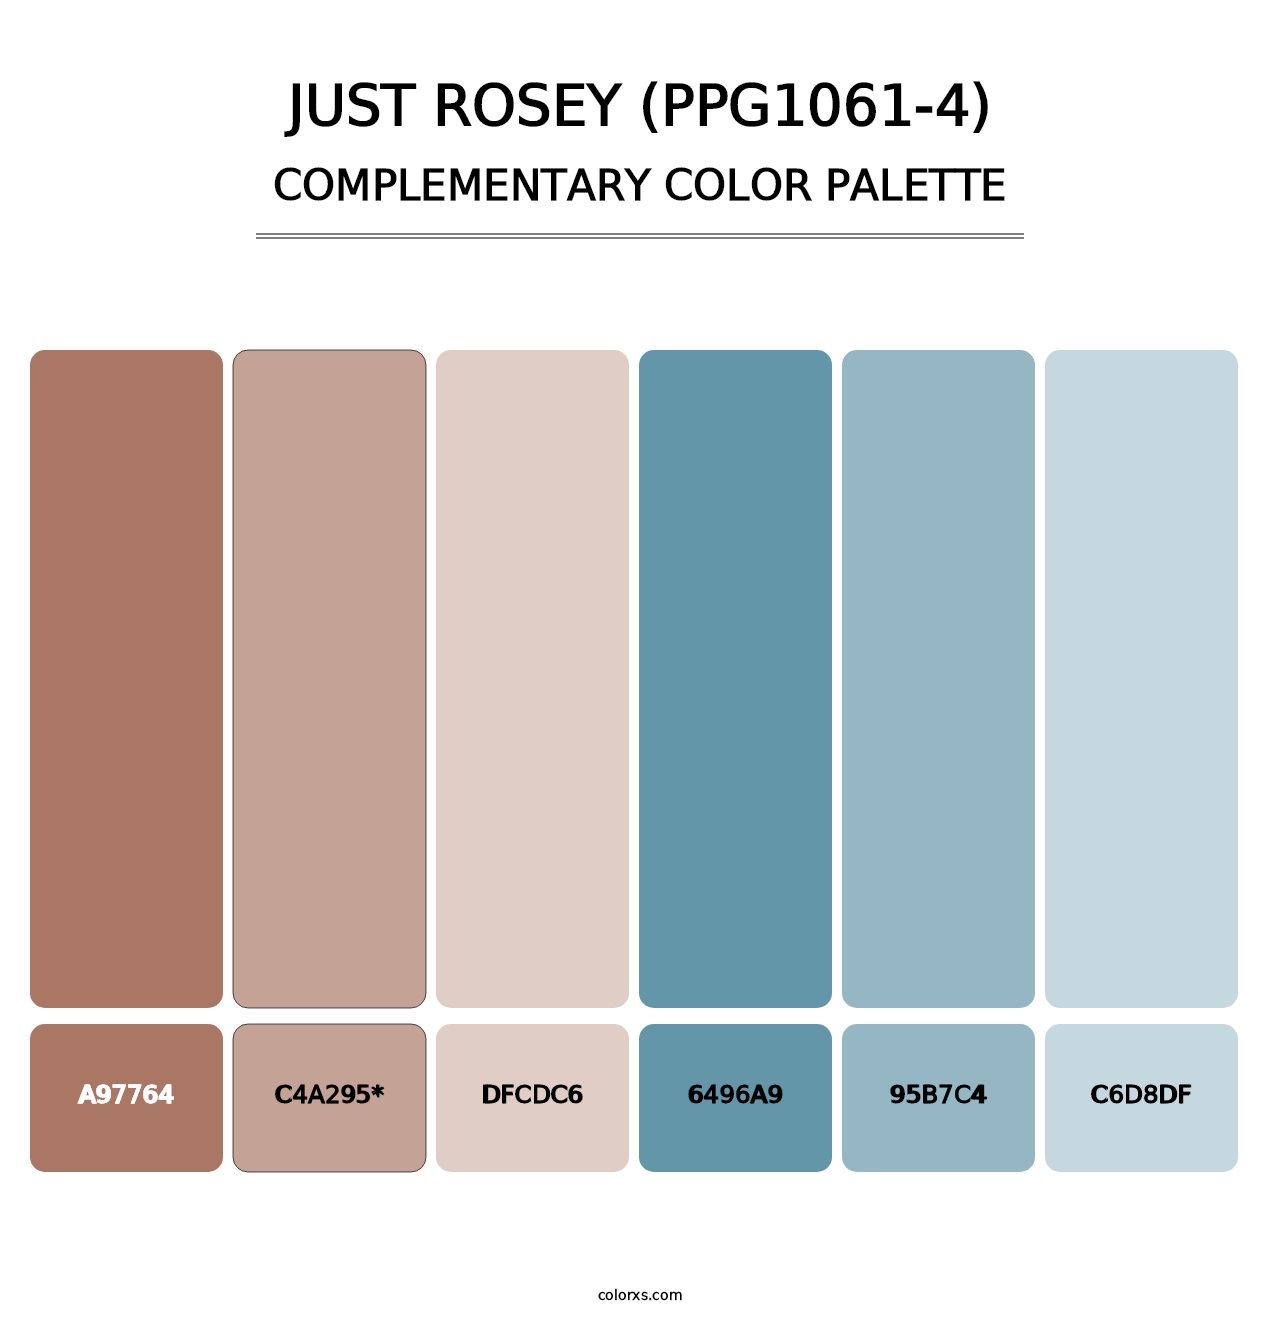 Just Rosey (PPG1061-4) - Complementary Color Palette